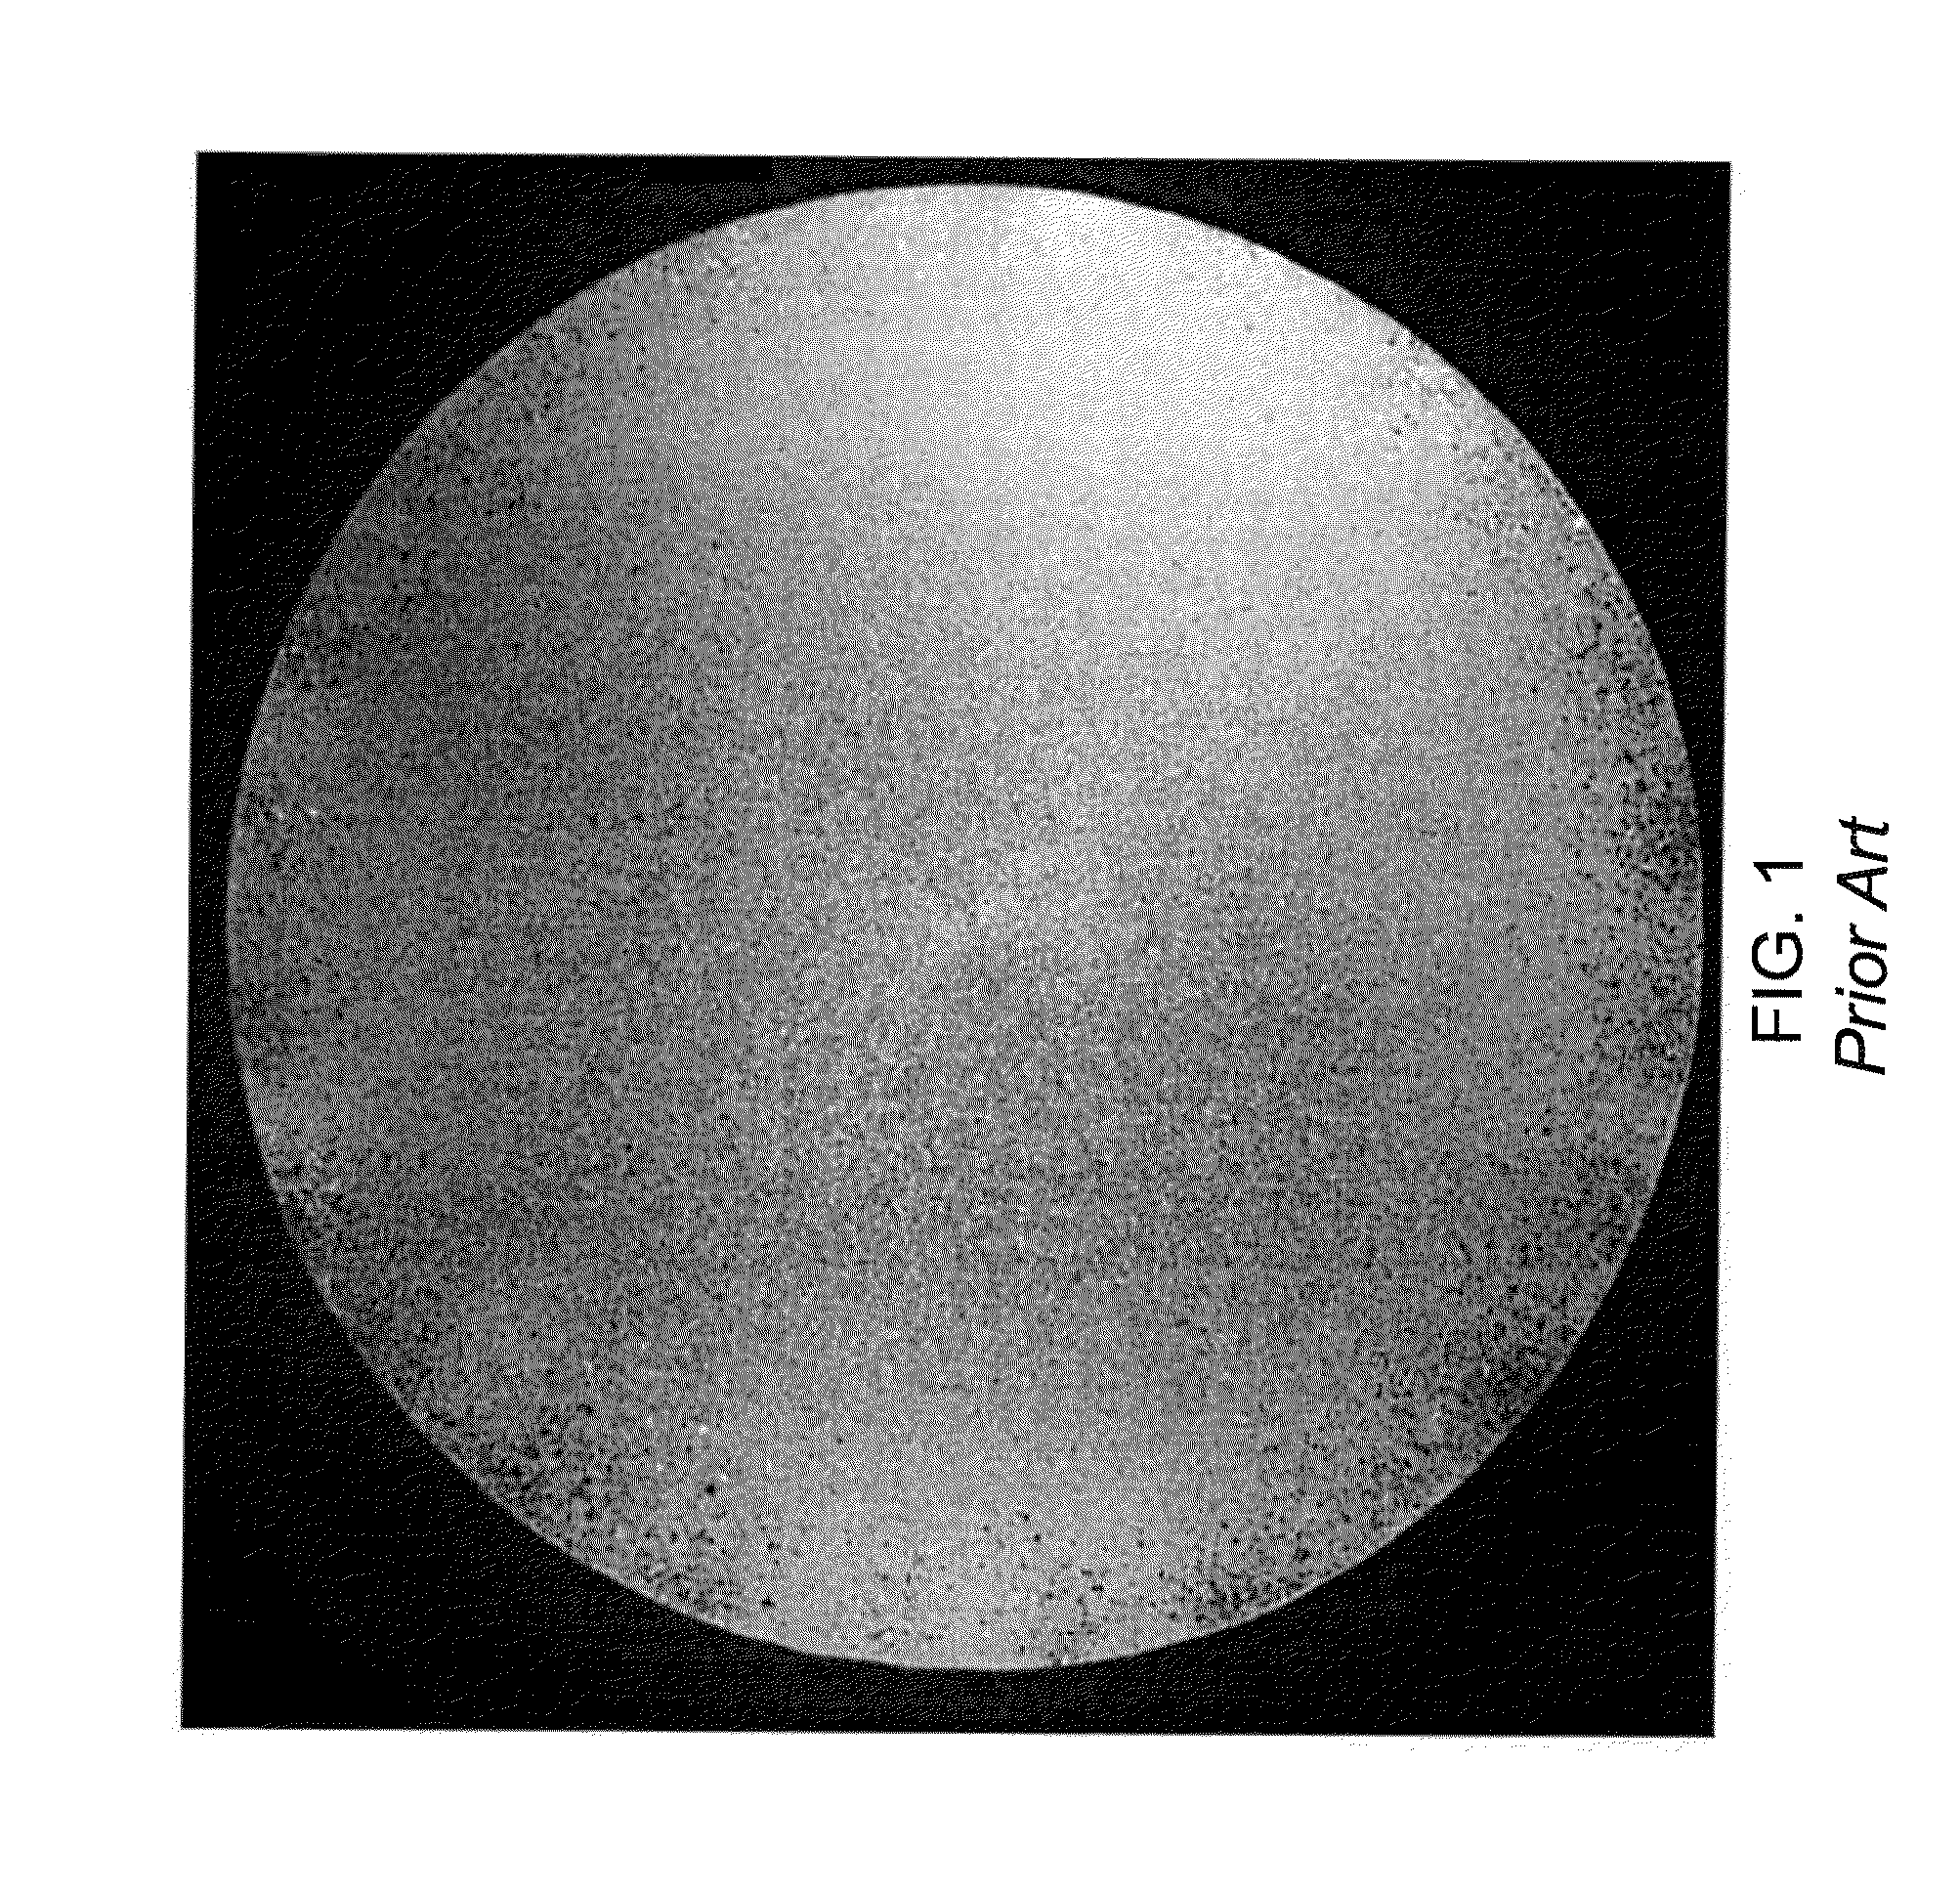 Methods for processing metal alloys